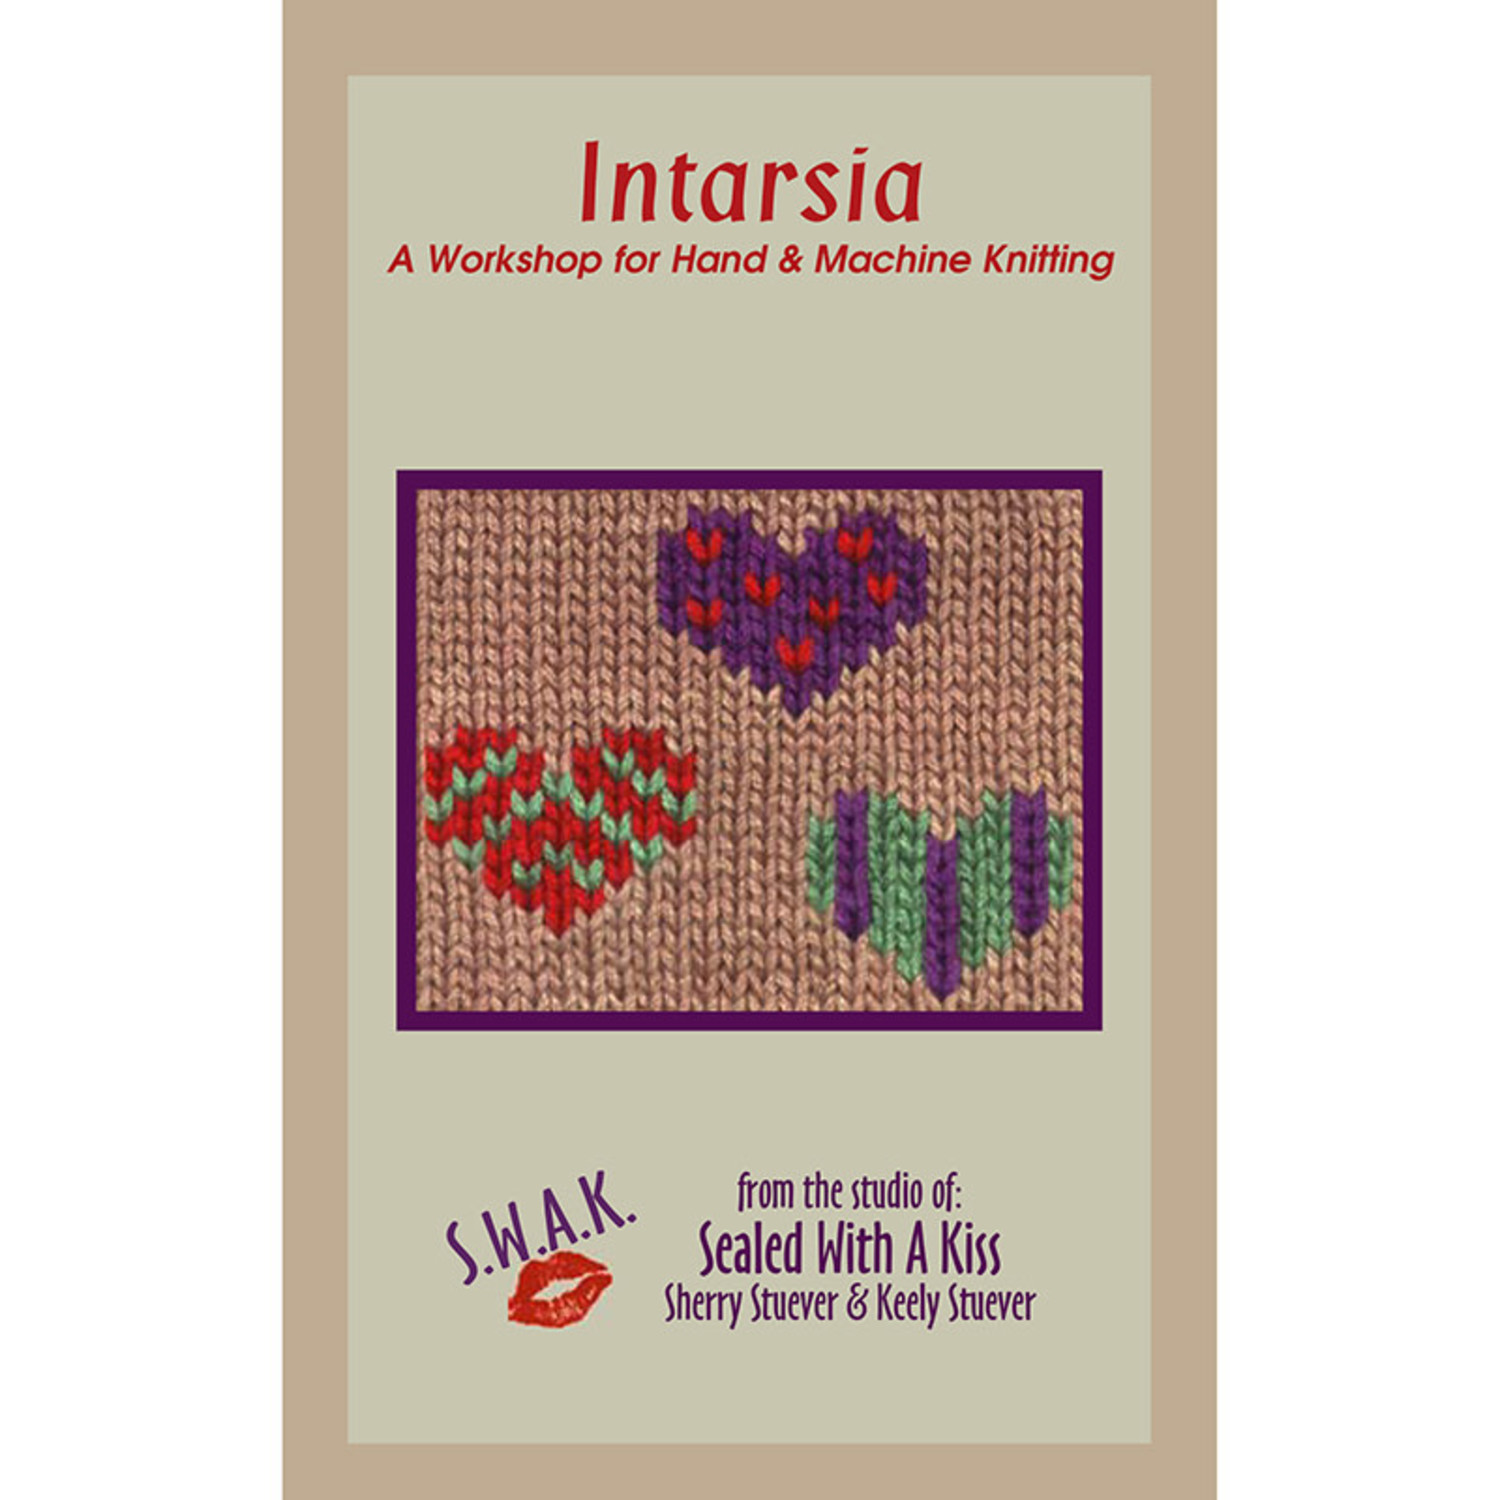 SWAK Intarsia: A Workshop for Hand - Sealed with a Kiss